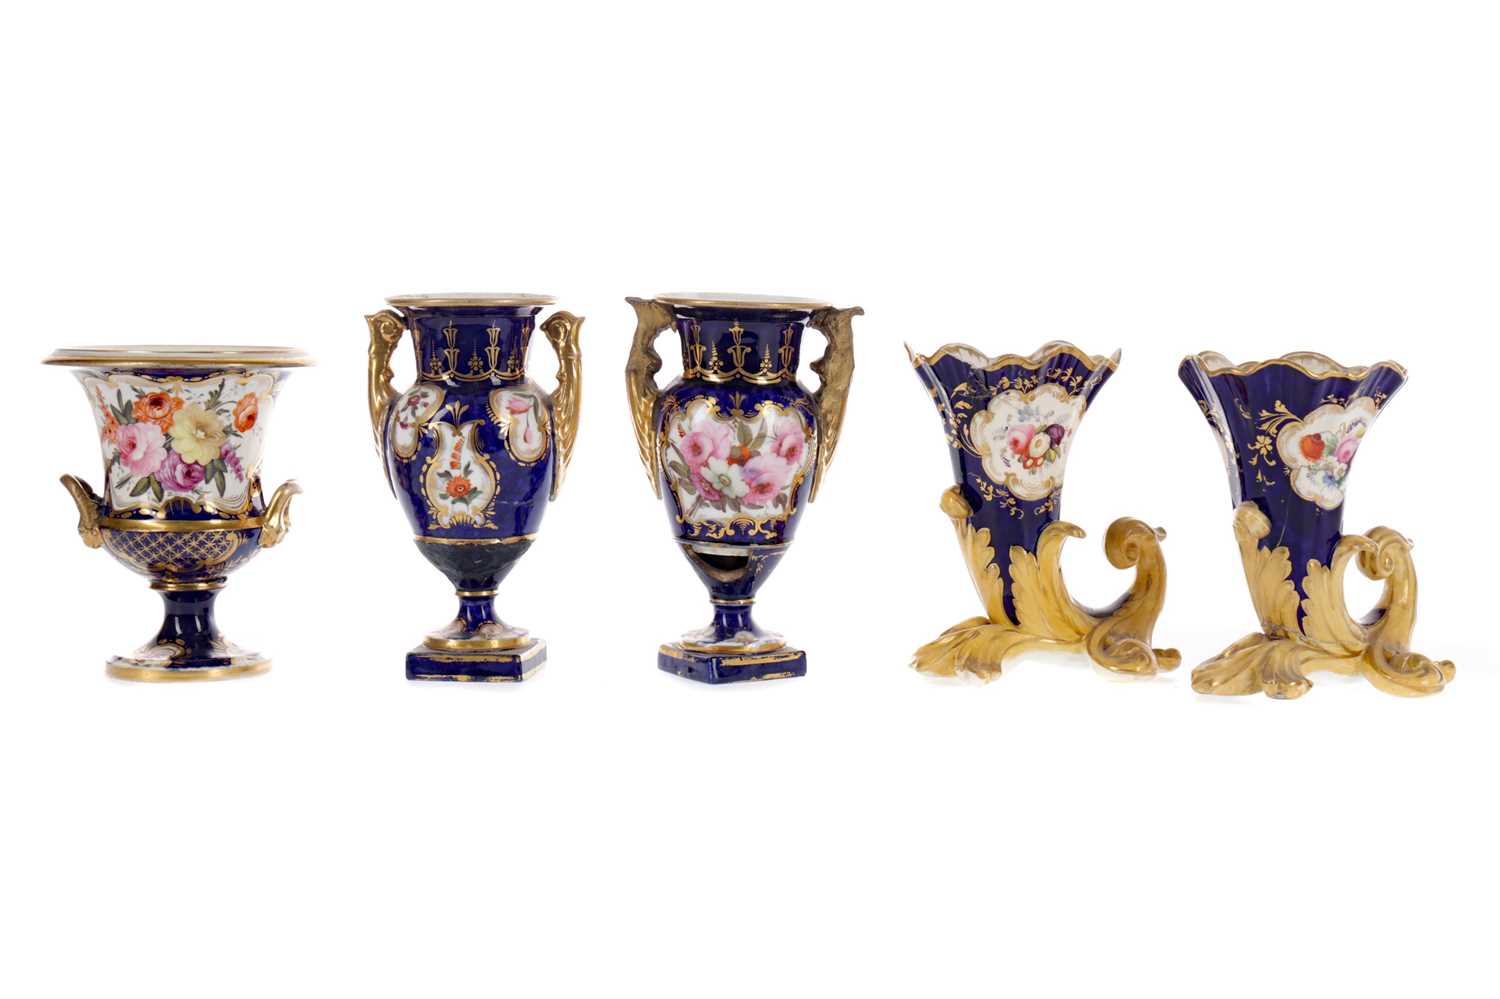 Lot 59 - A PAIR OF EARLY 19TH CENTURY ENGLISH PORCELAIN VASES, ALONG WITH ANOTHER PAIR AND ONE OTHER